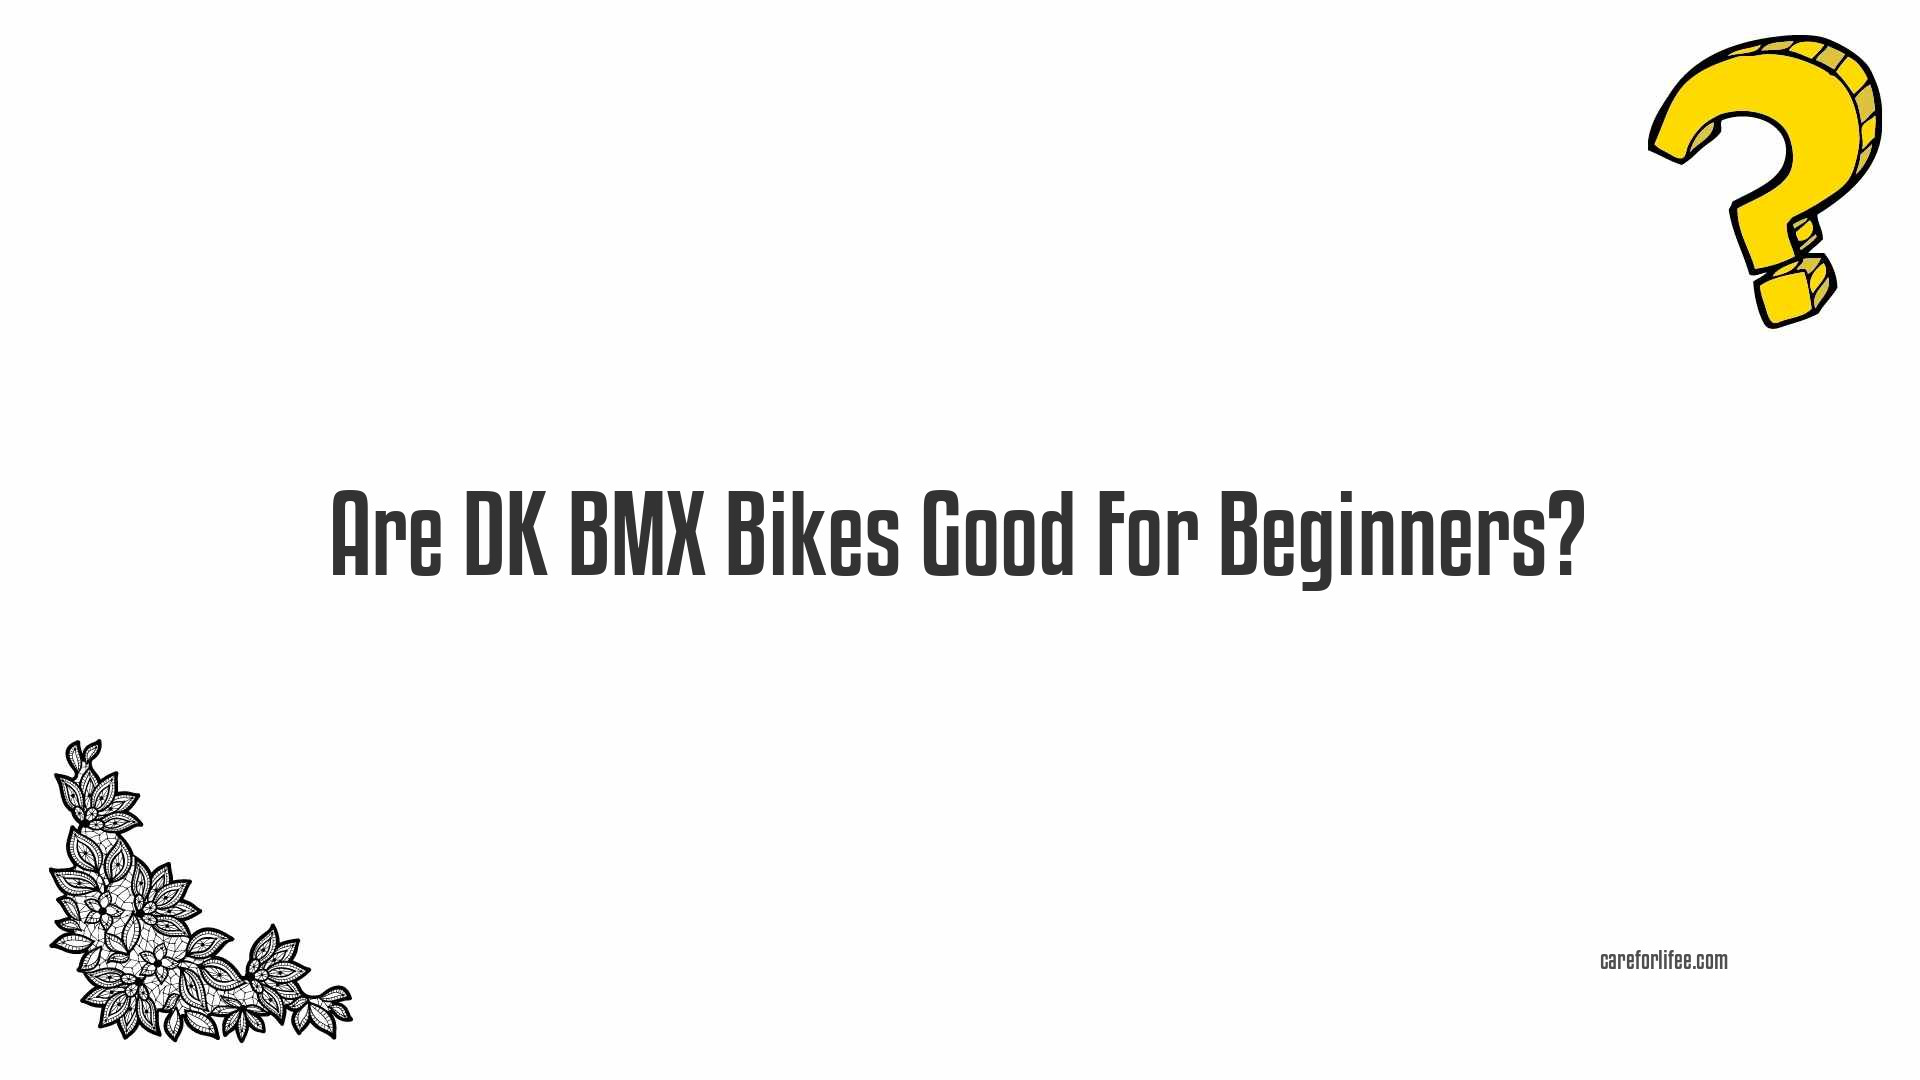 Are DK BMX Bikes Good For Beginners?